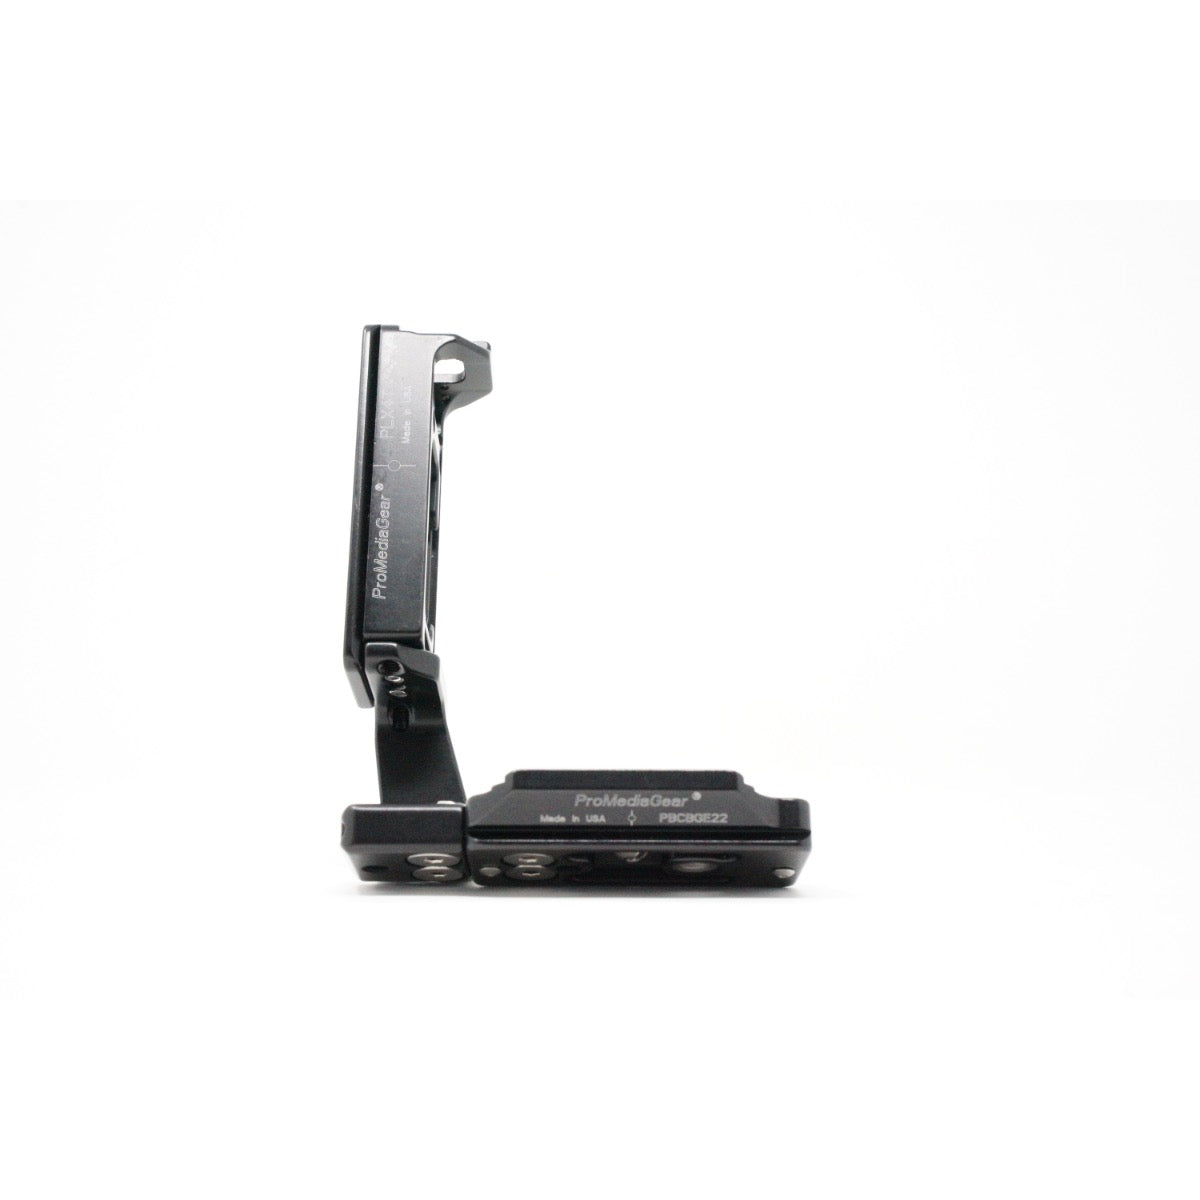 USED Arca-Swiss L-Bracket for Canon EOS-R with BG-E22 Battery Grip